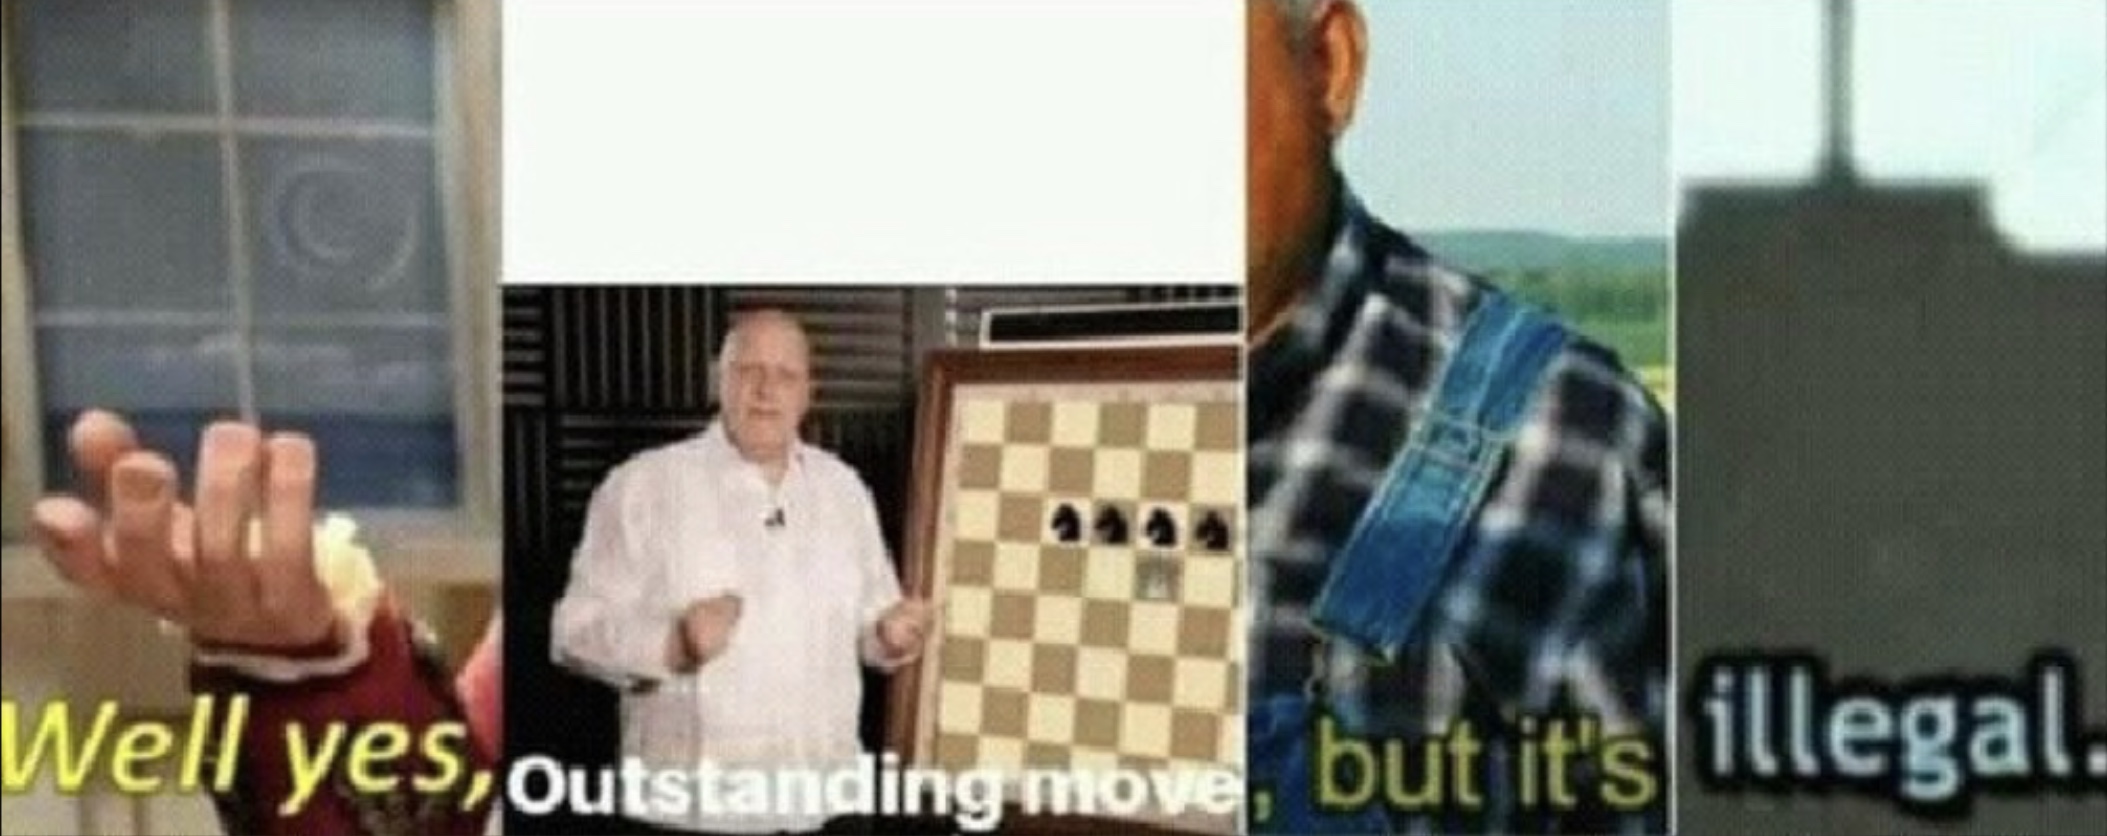 High Quality Well yes, outstanding move, but it’s illegal Blank Meme Template